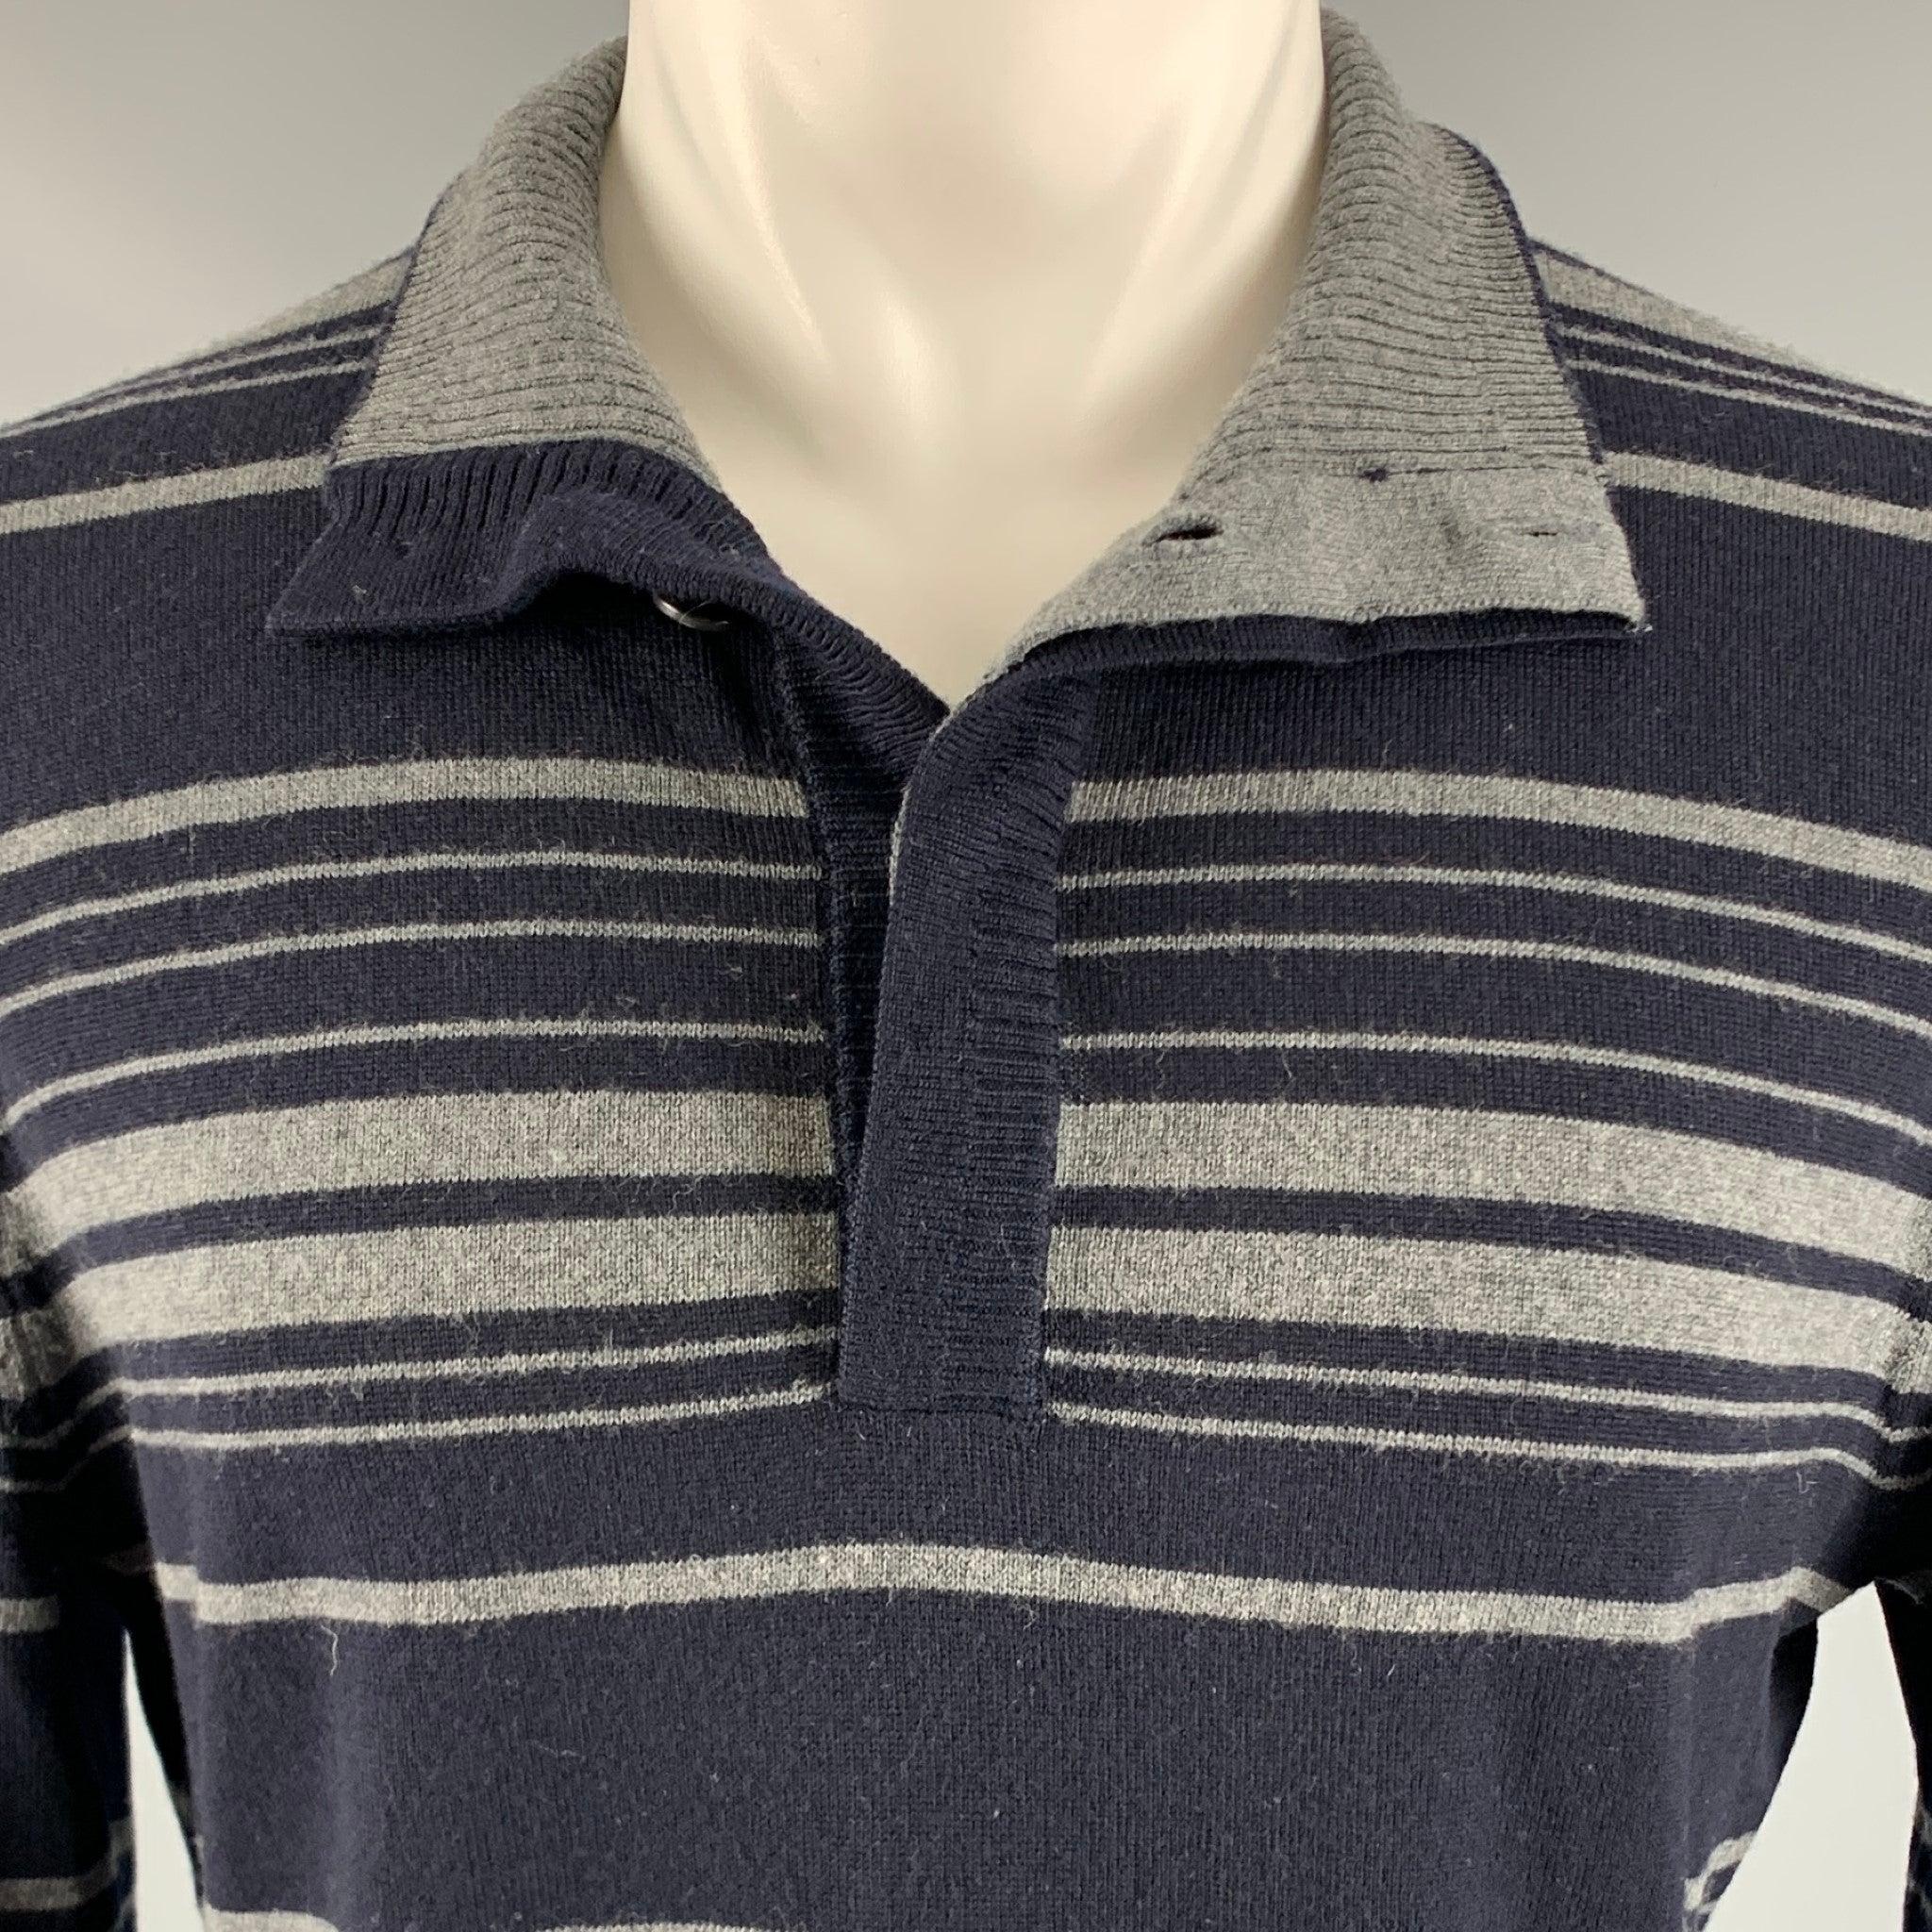 ELIE TAHARI pullover
in a
navy and grey merino wool knit featuring long sleeves, stripe pattern, and a half placket with hidden button closure.Very Good Pre-Owned Condition. Minor mark.  

Marked:   size tag removed. 

Measurements: 
 
Shoulder: 18